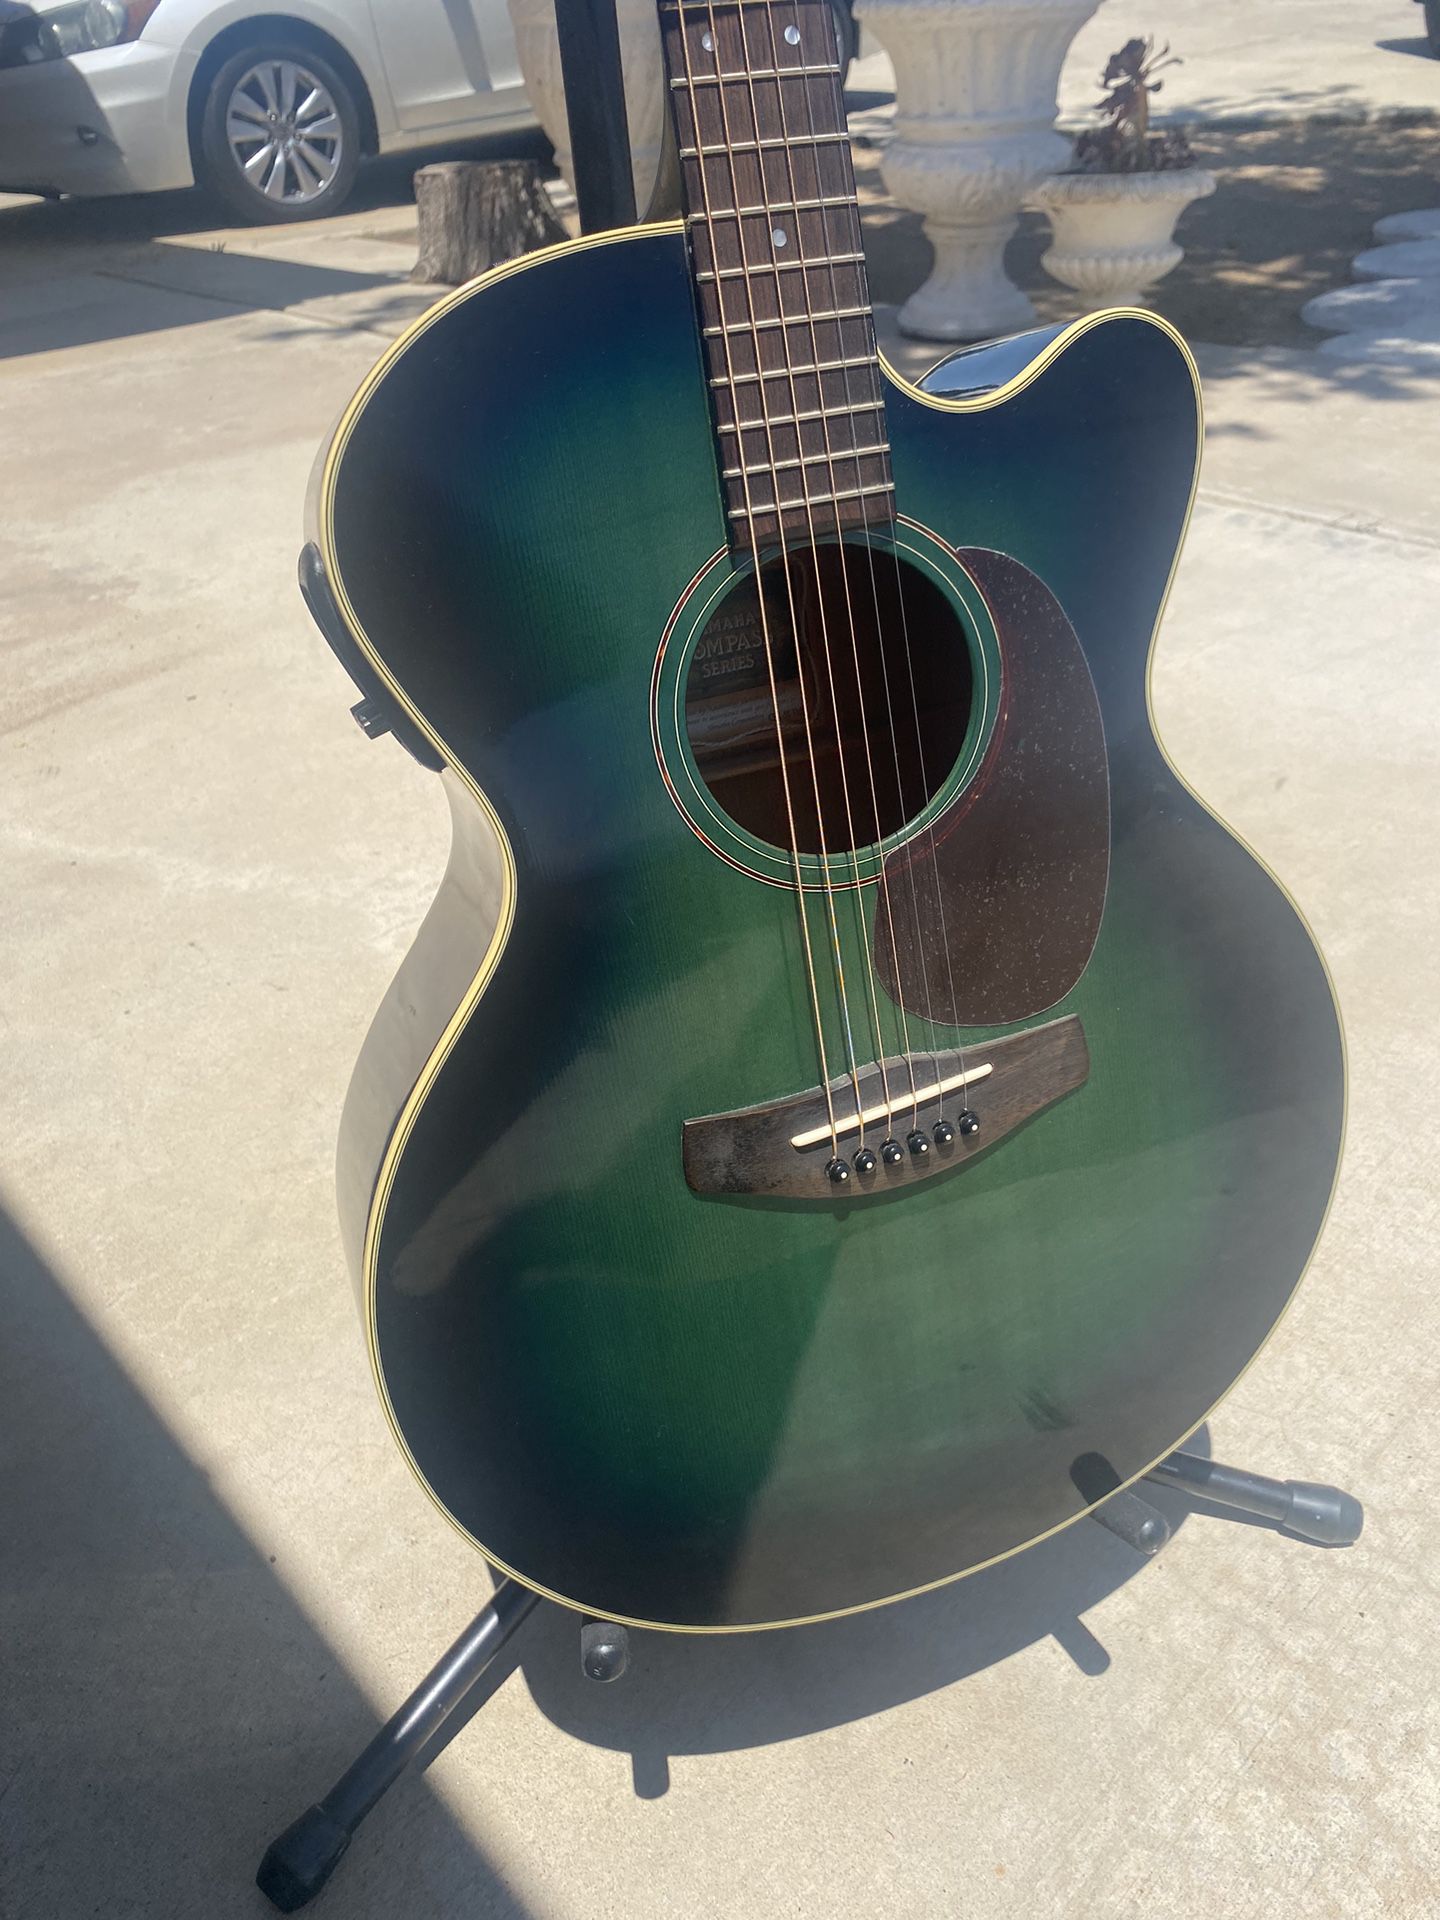 YAMAHA ACOUTIC/ELECTRIC  COMPASS SERIES   $500